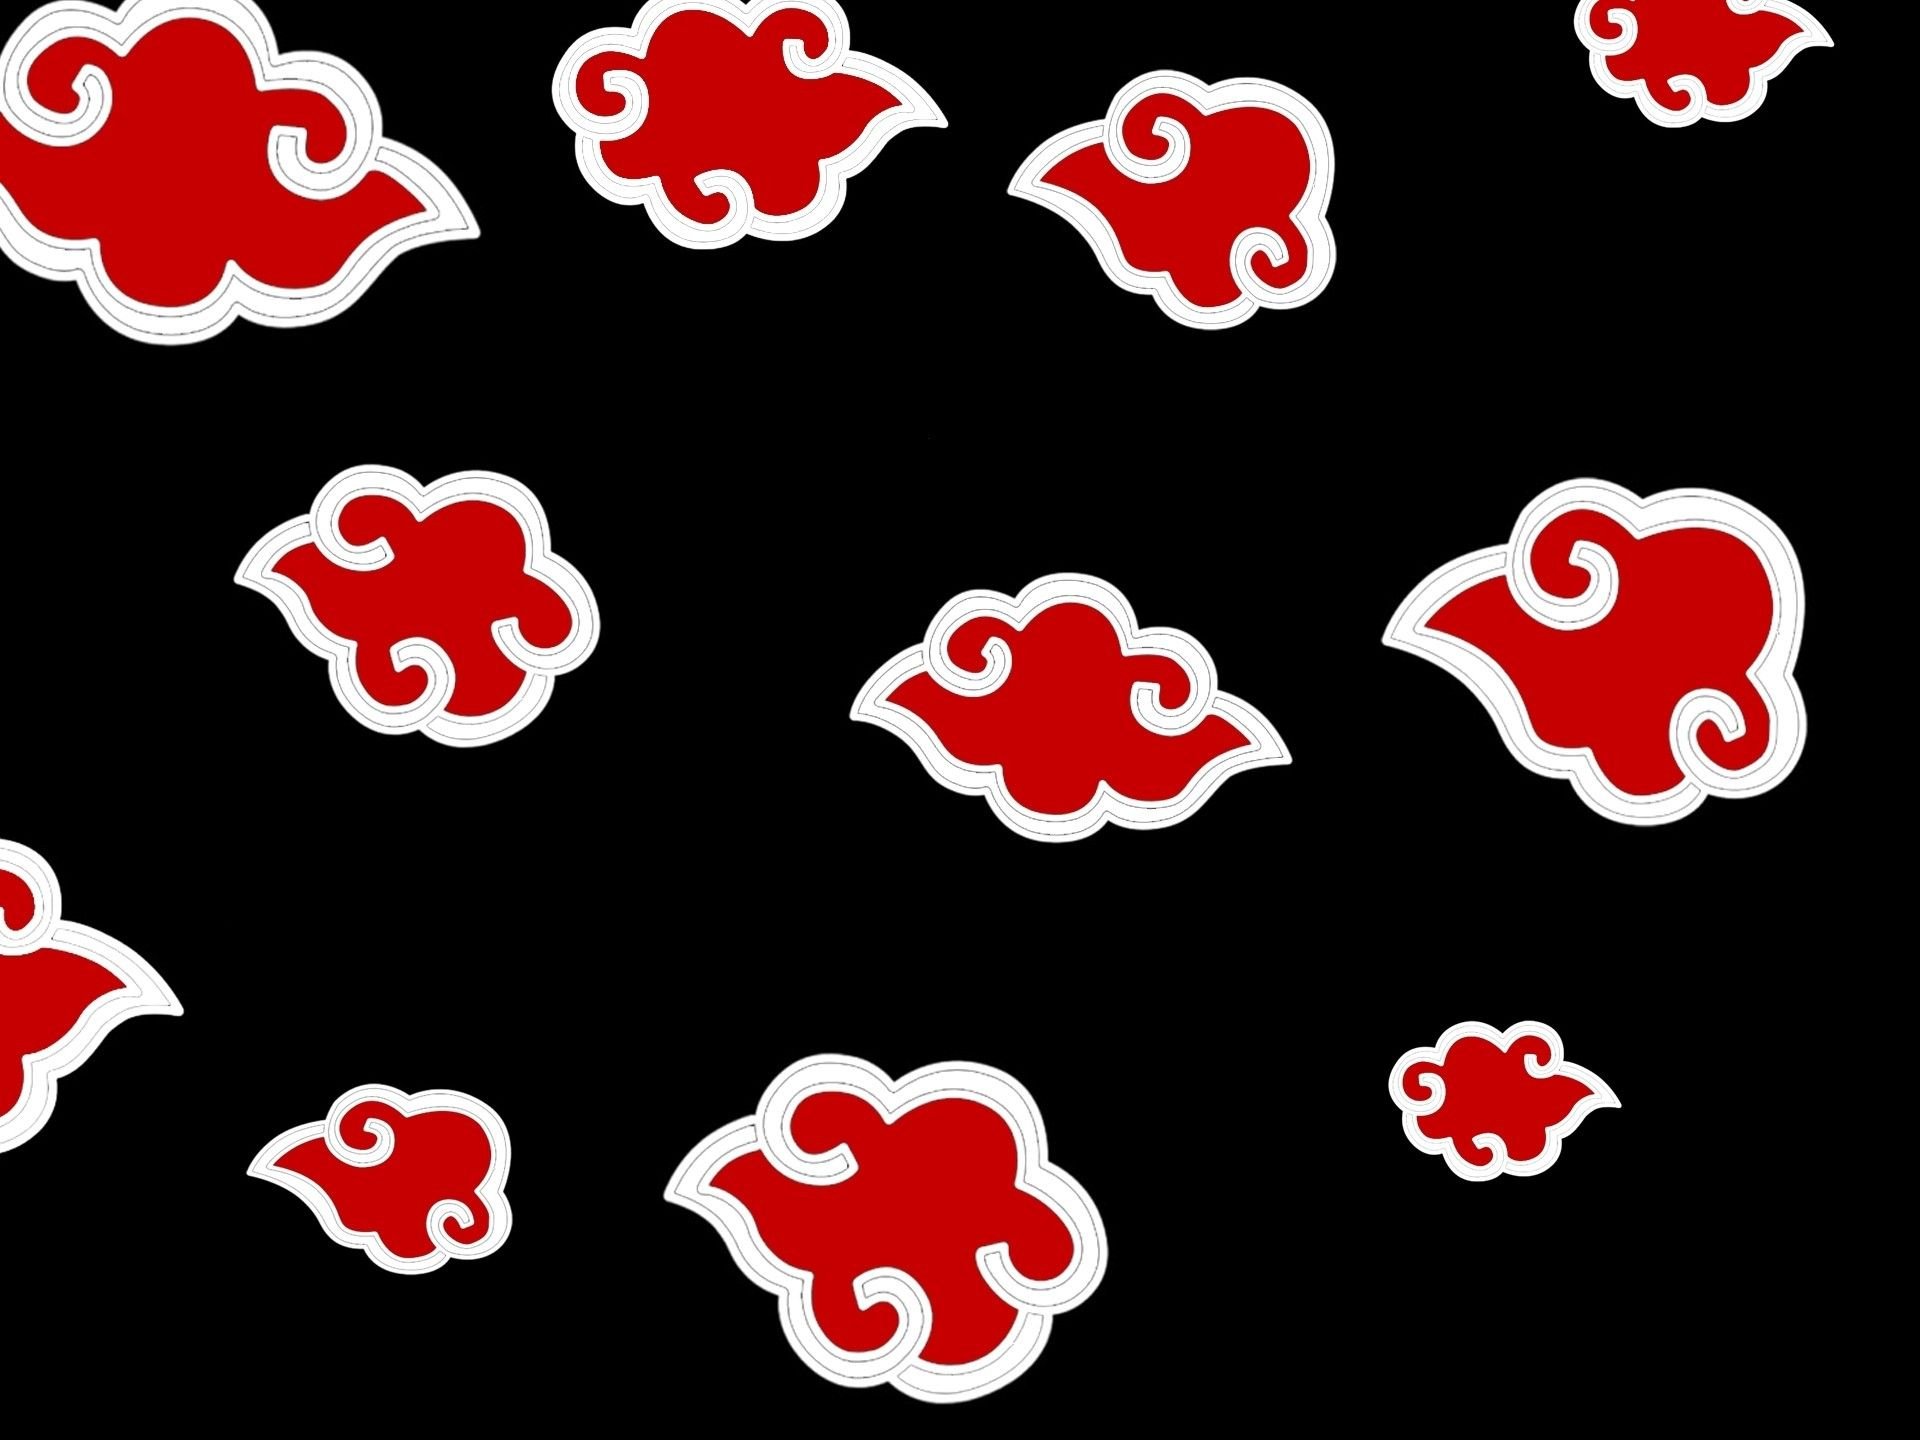 Abstract Clouds Red Patterns Naruto Shippuden Akatsuki Red Clouds HD Wallpaper